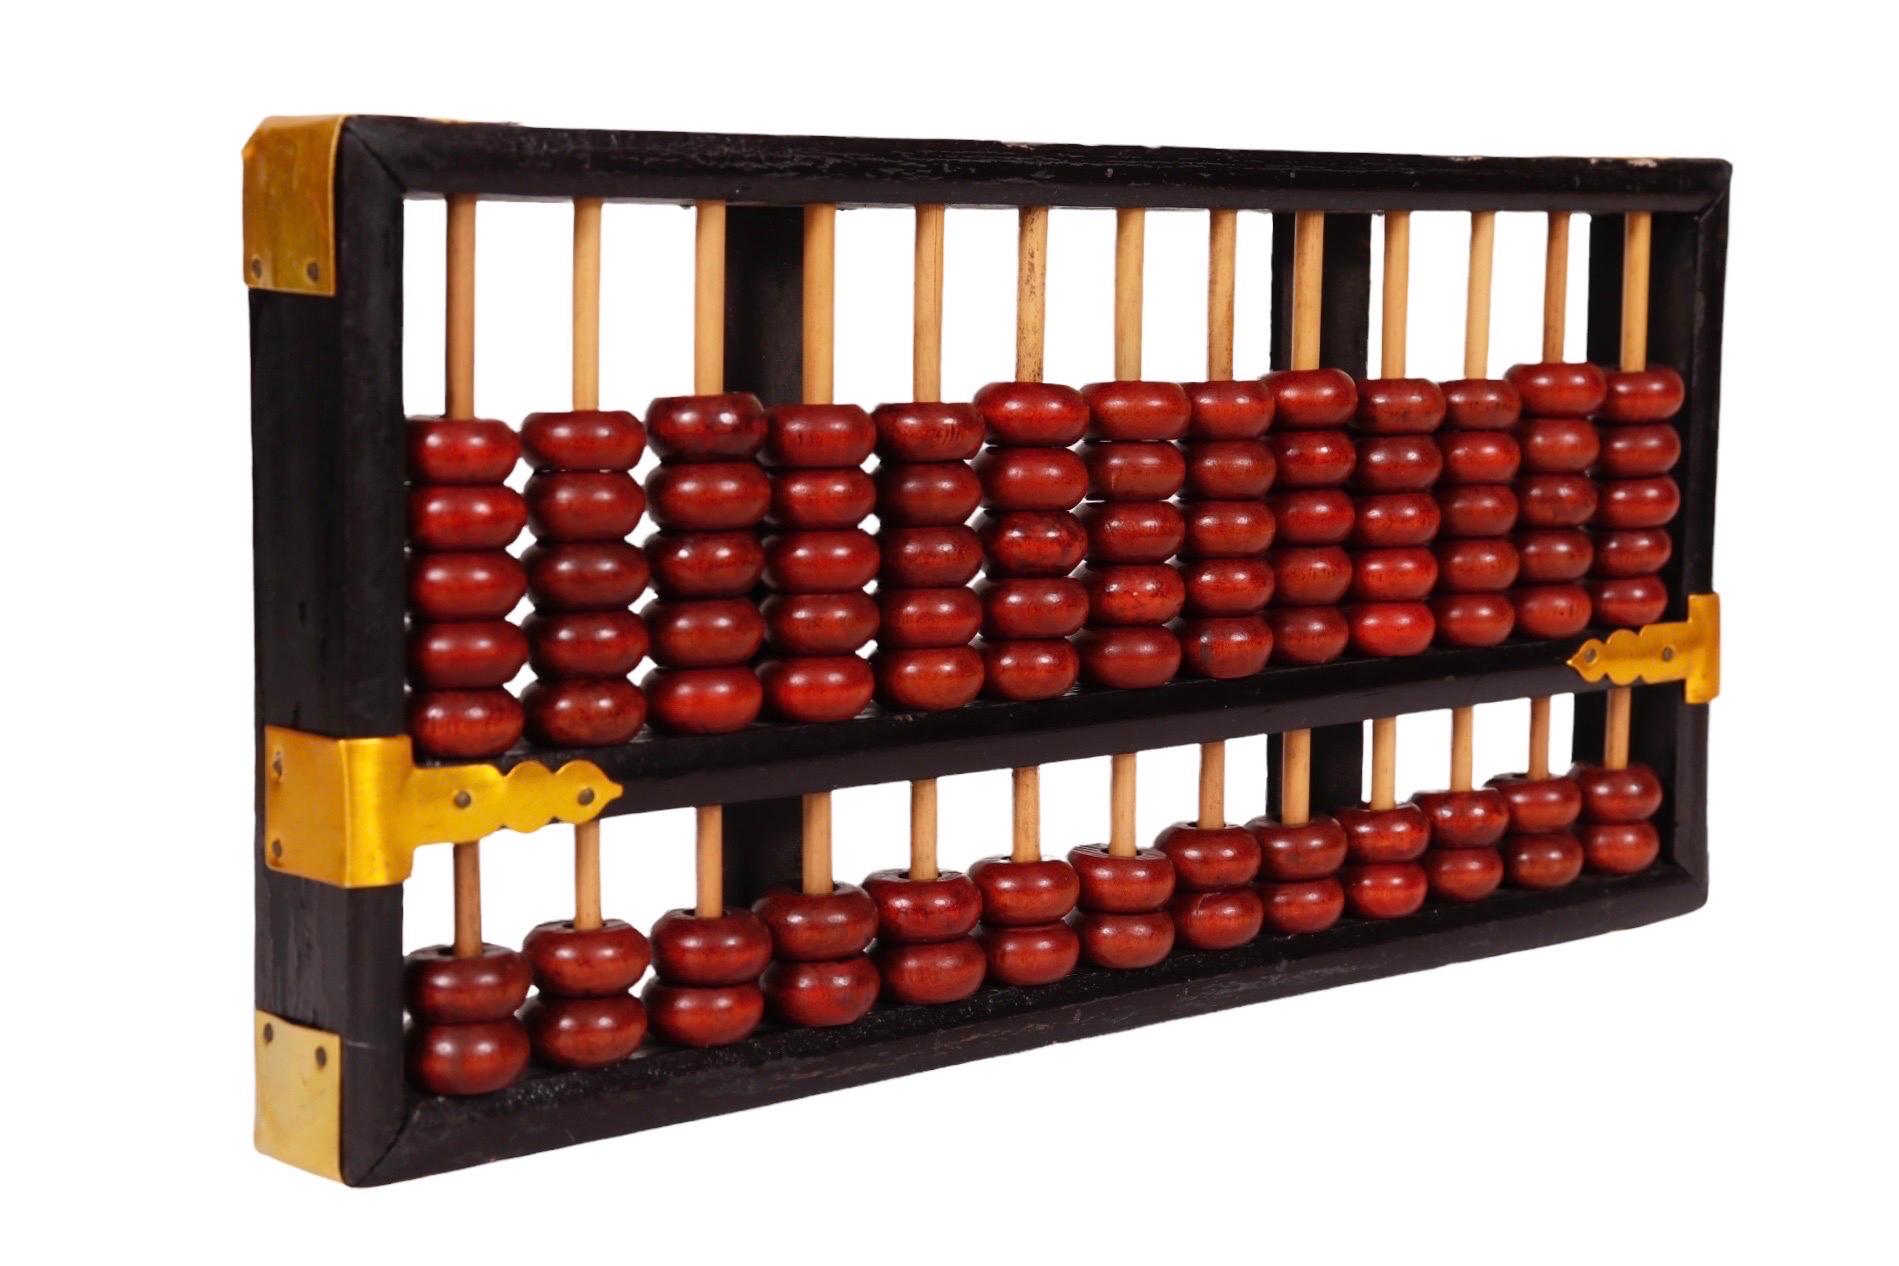 A Chinese abacus dating from 1912 to 1949. A black lacquered frame secured with brass corners houses 13 bamboo rods, each with five and two red wooden beads. The original label underneath reads 